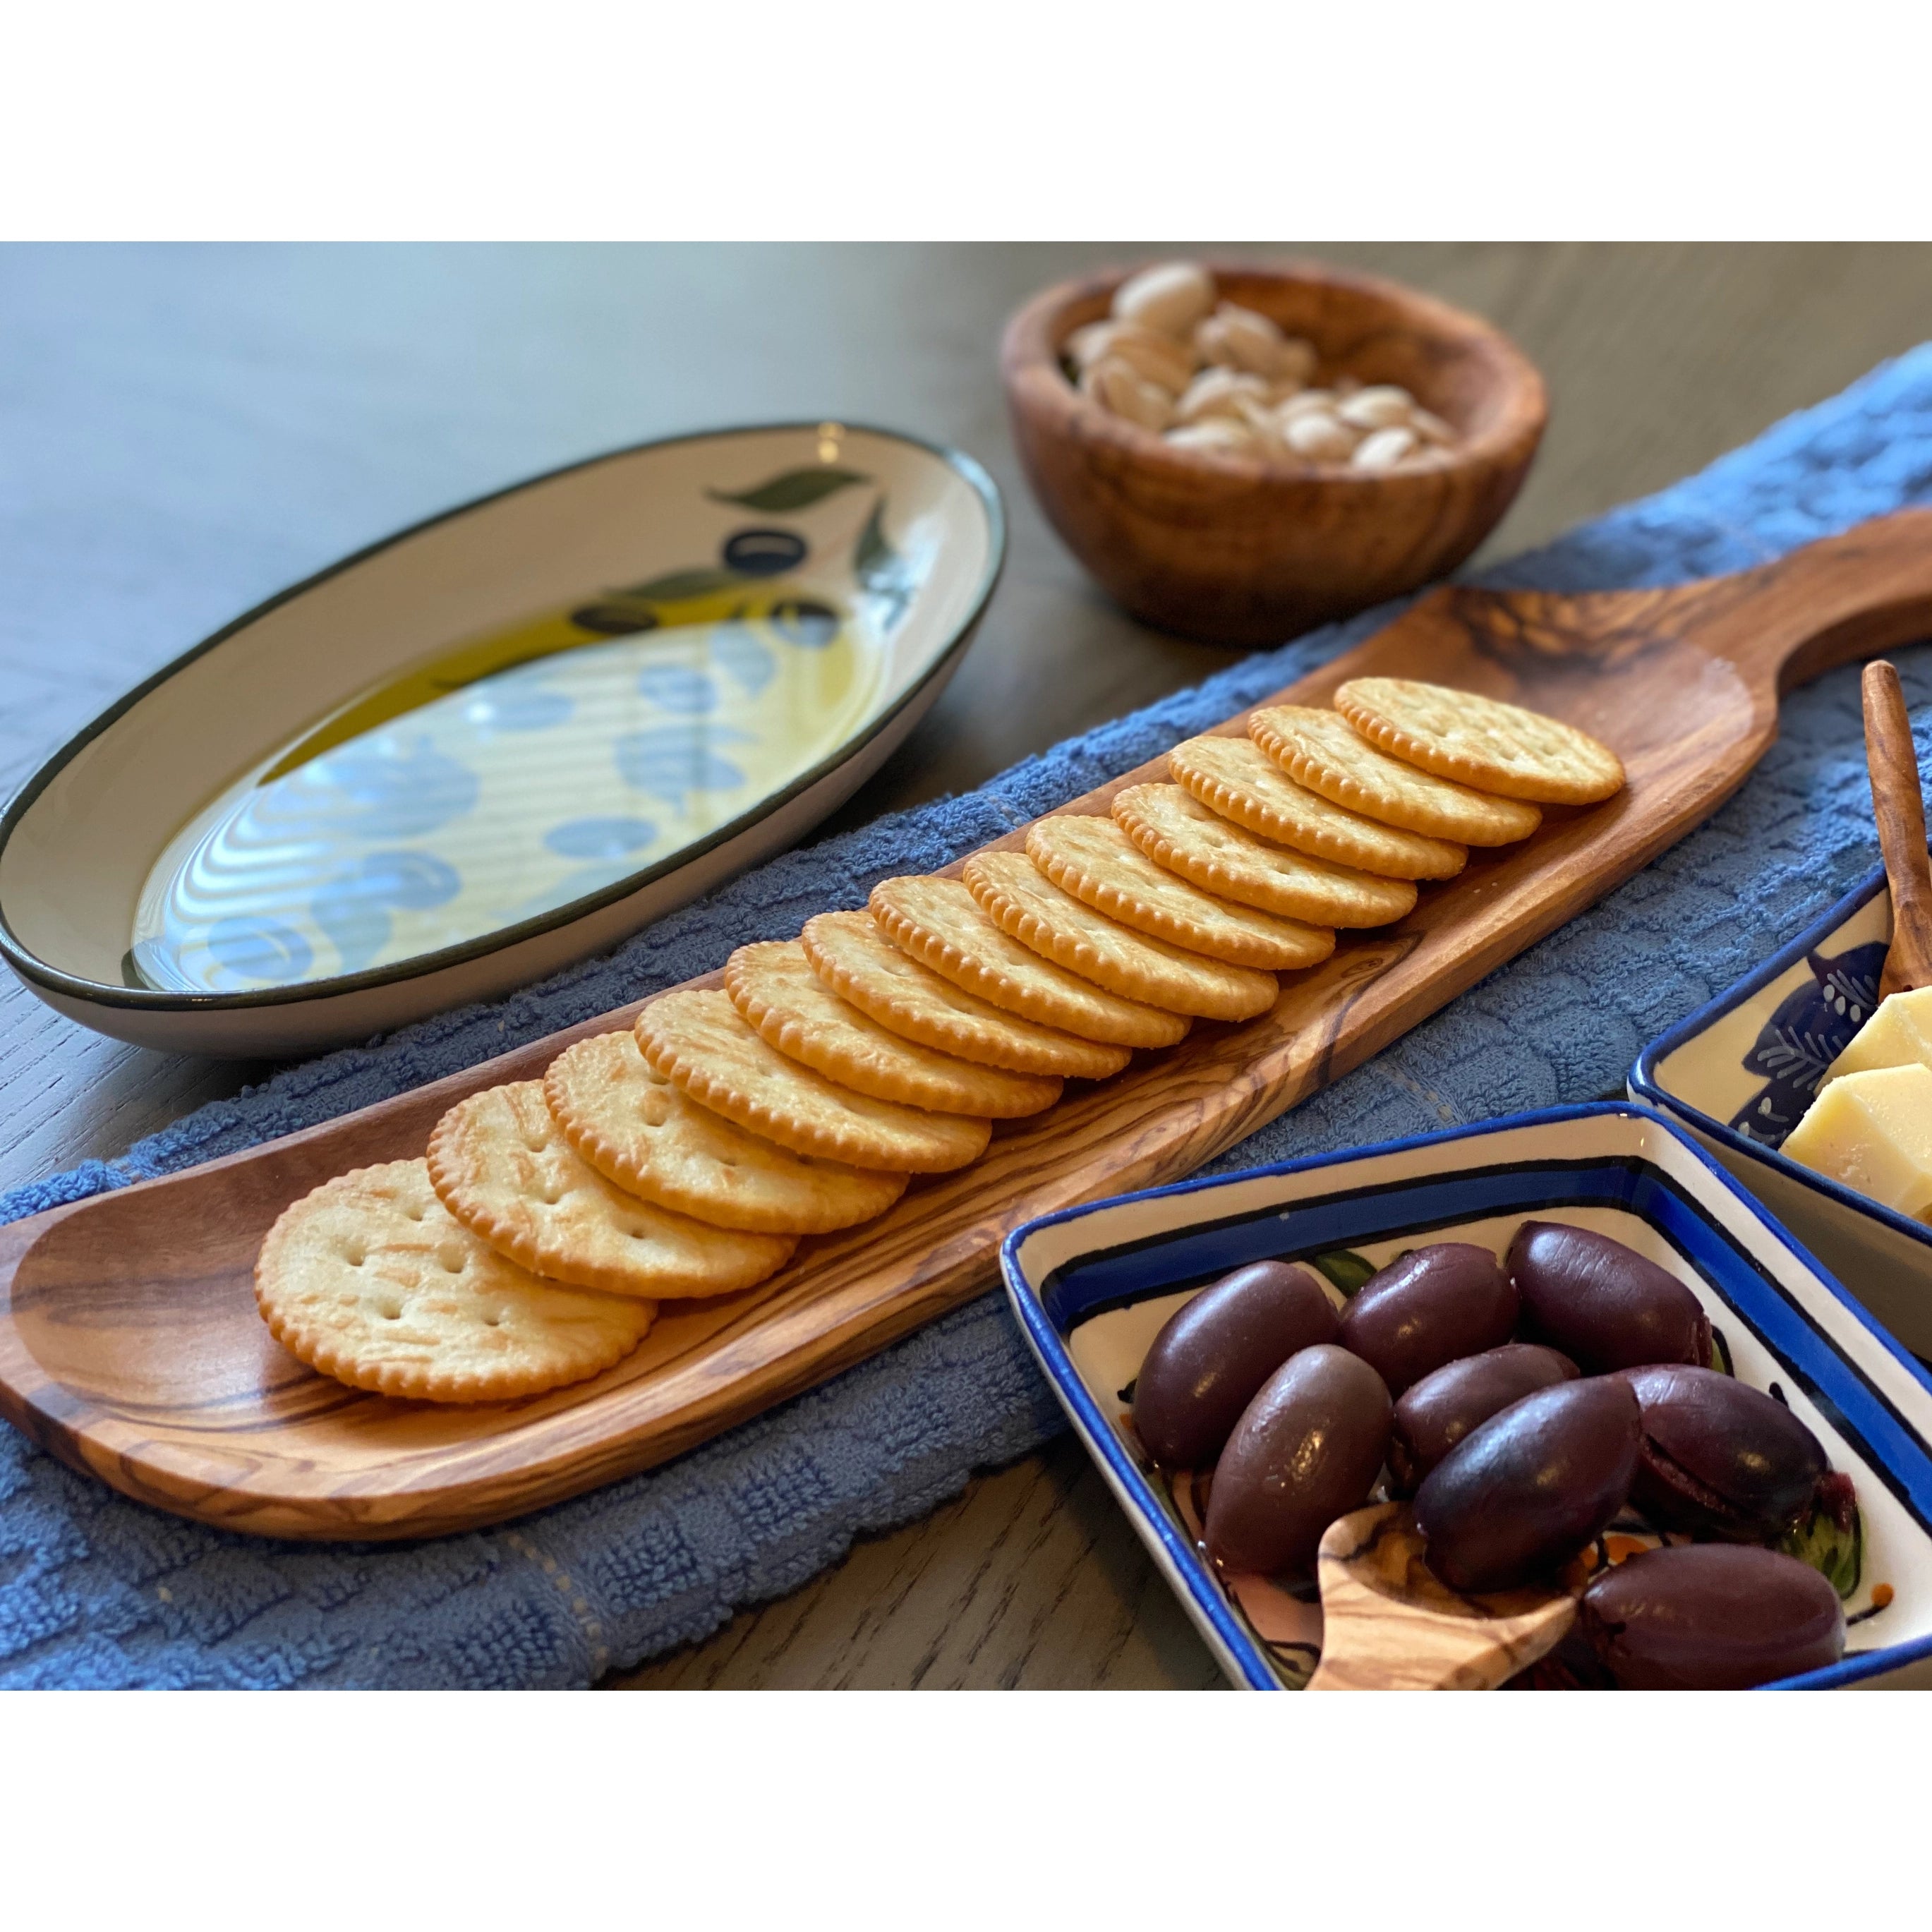 Olive Wood Crackers Tray